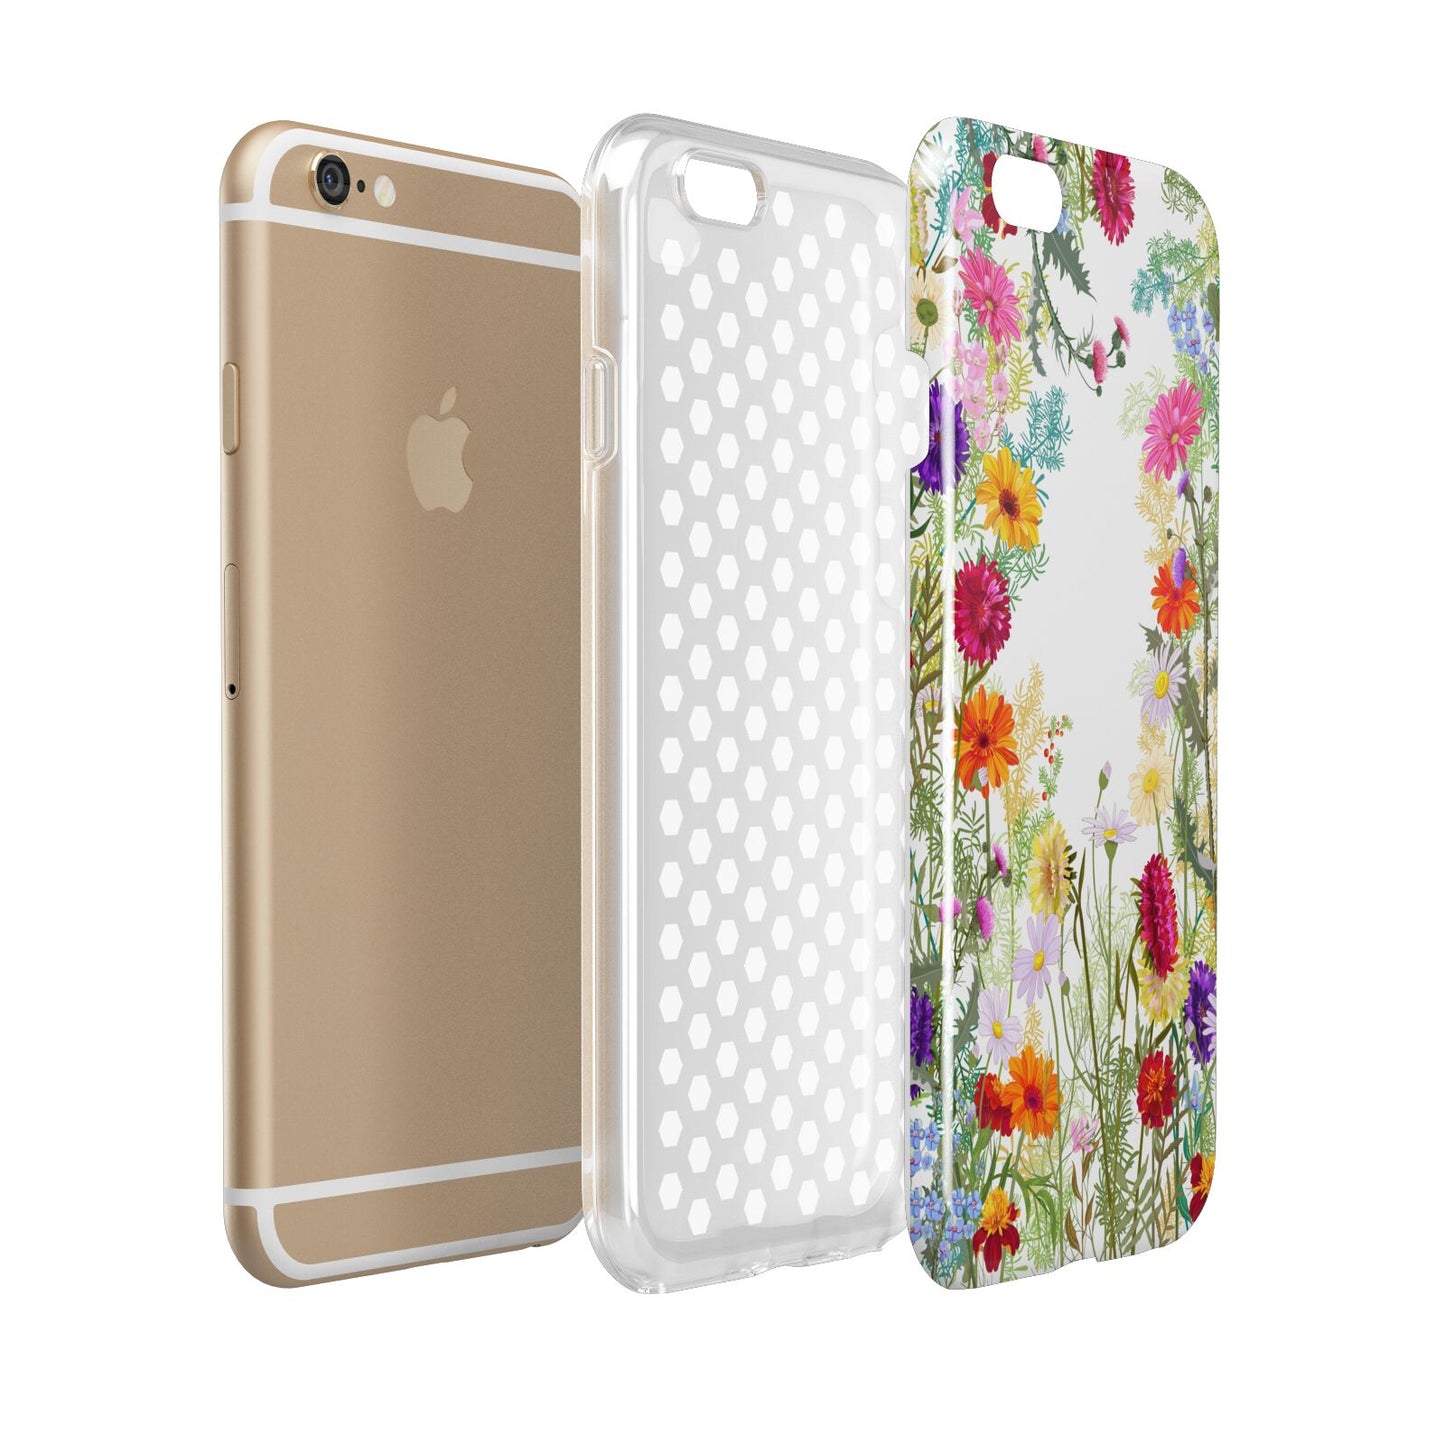 Wildflower Apple iPhone 6 3D Tough Case Expanded view